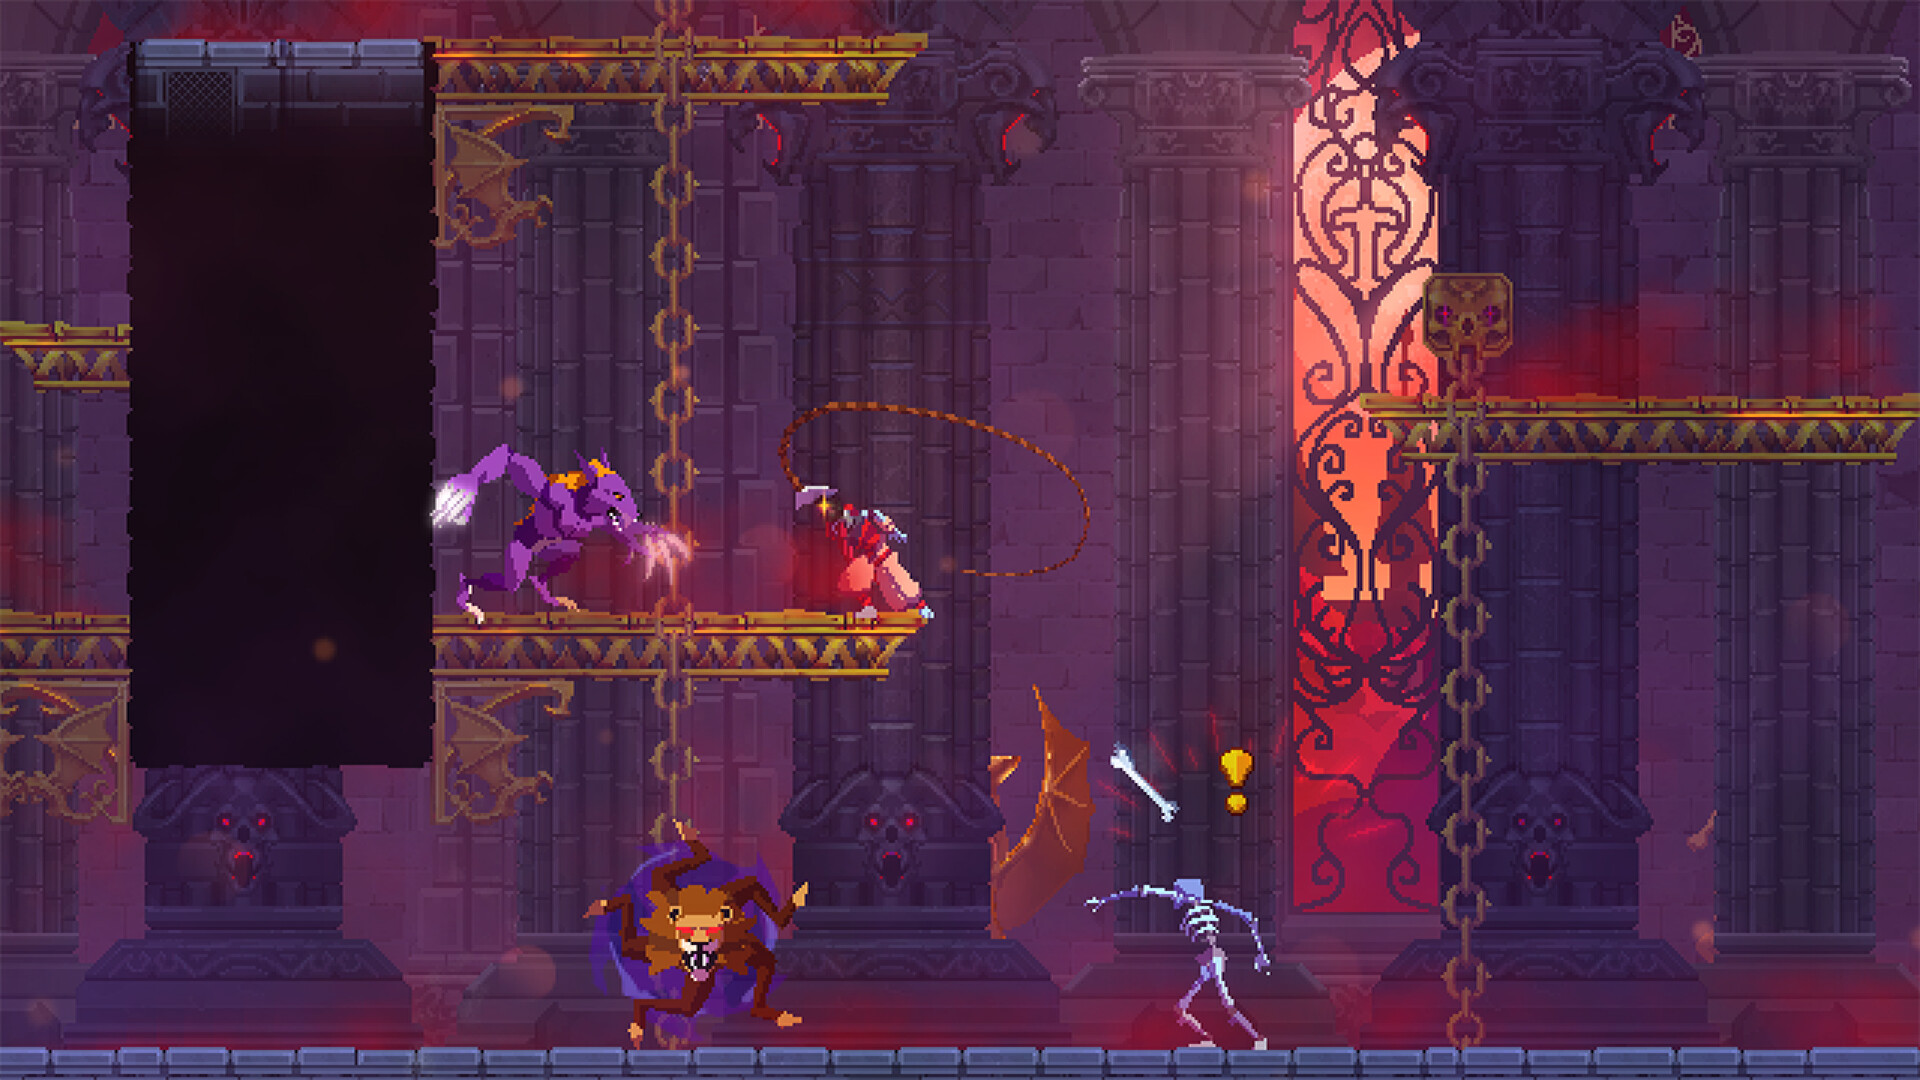 download dead cells return to castlevania-skidrow full pc cracked direct links dlgames - download all your games for free